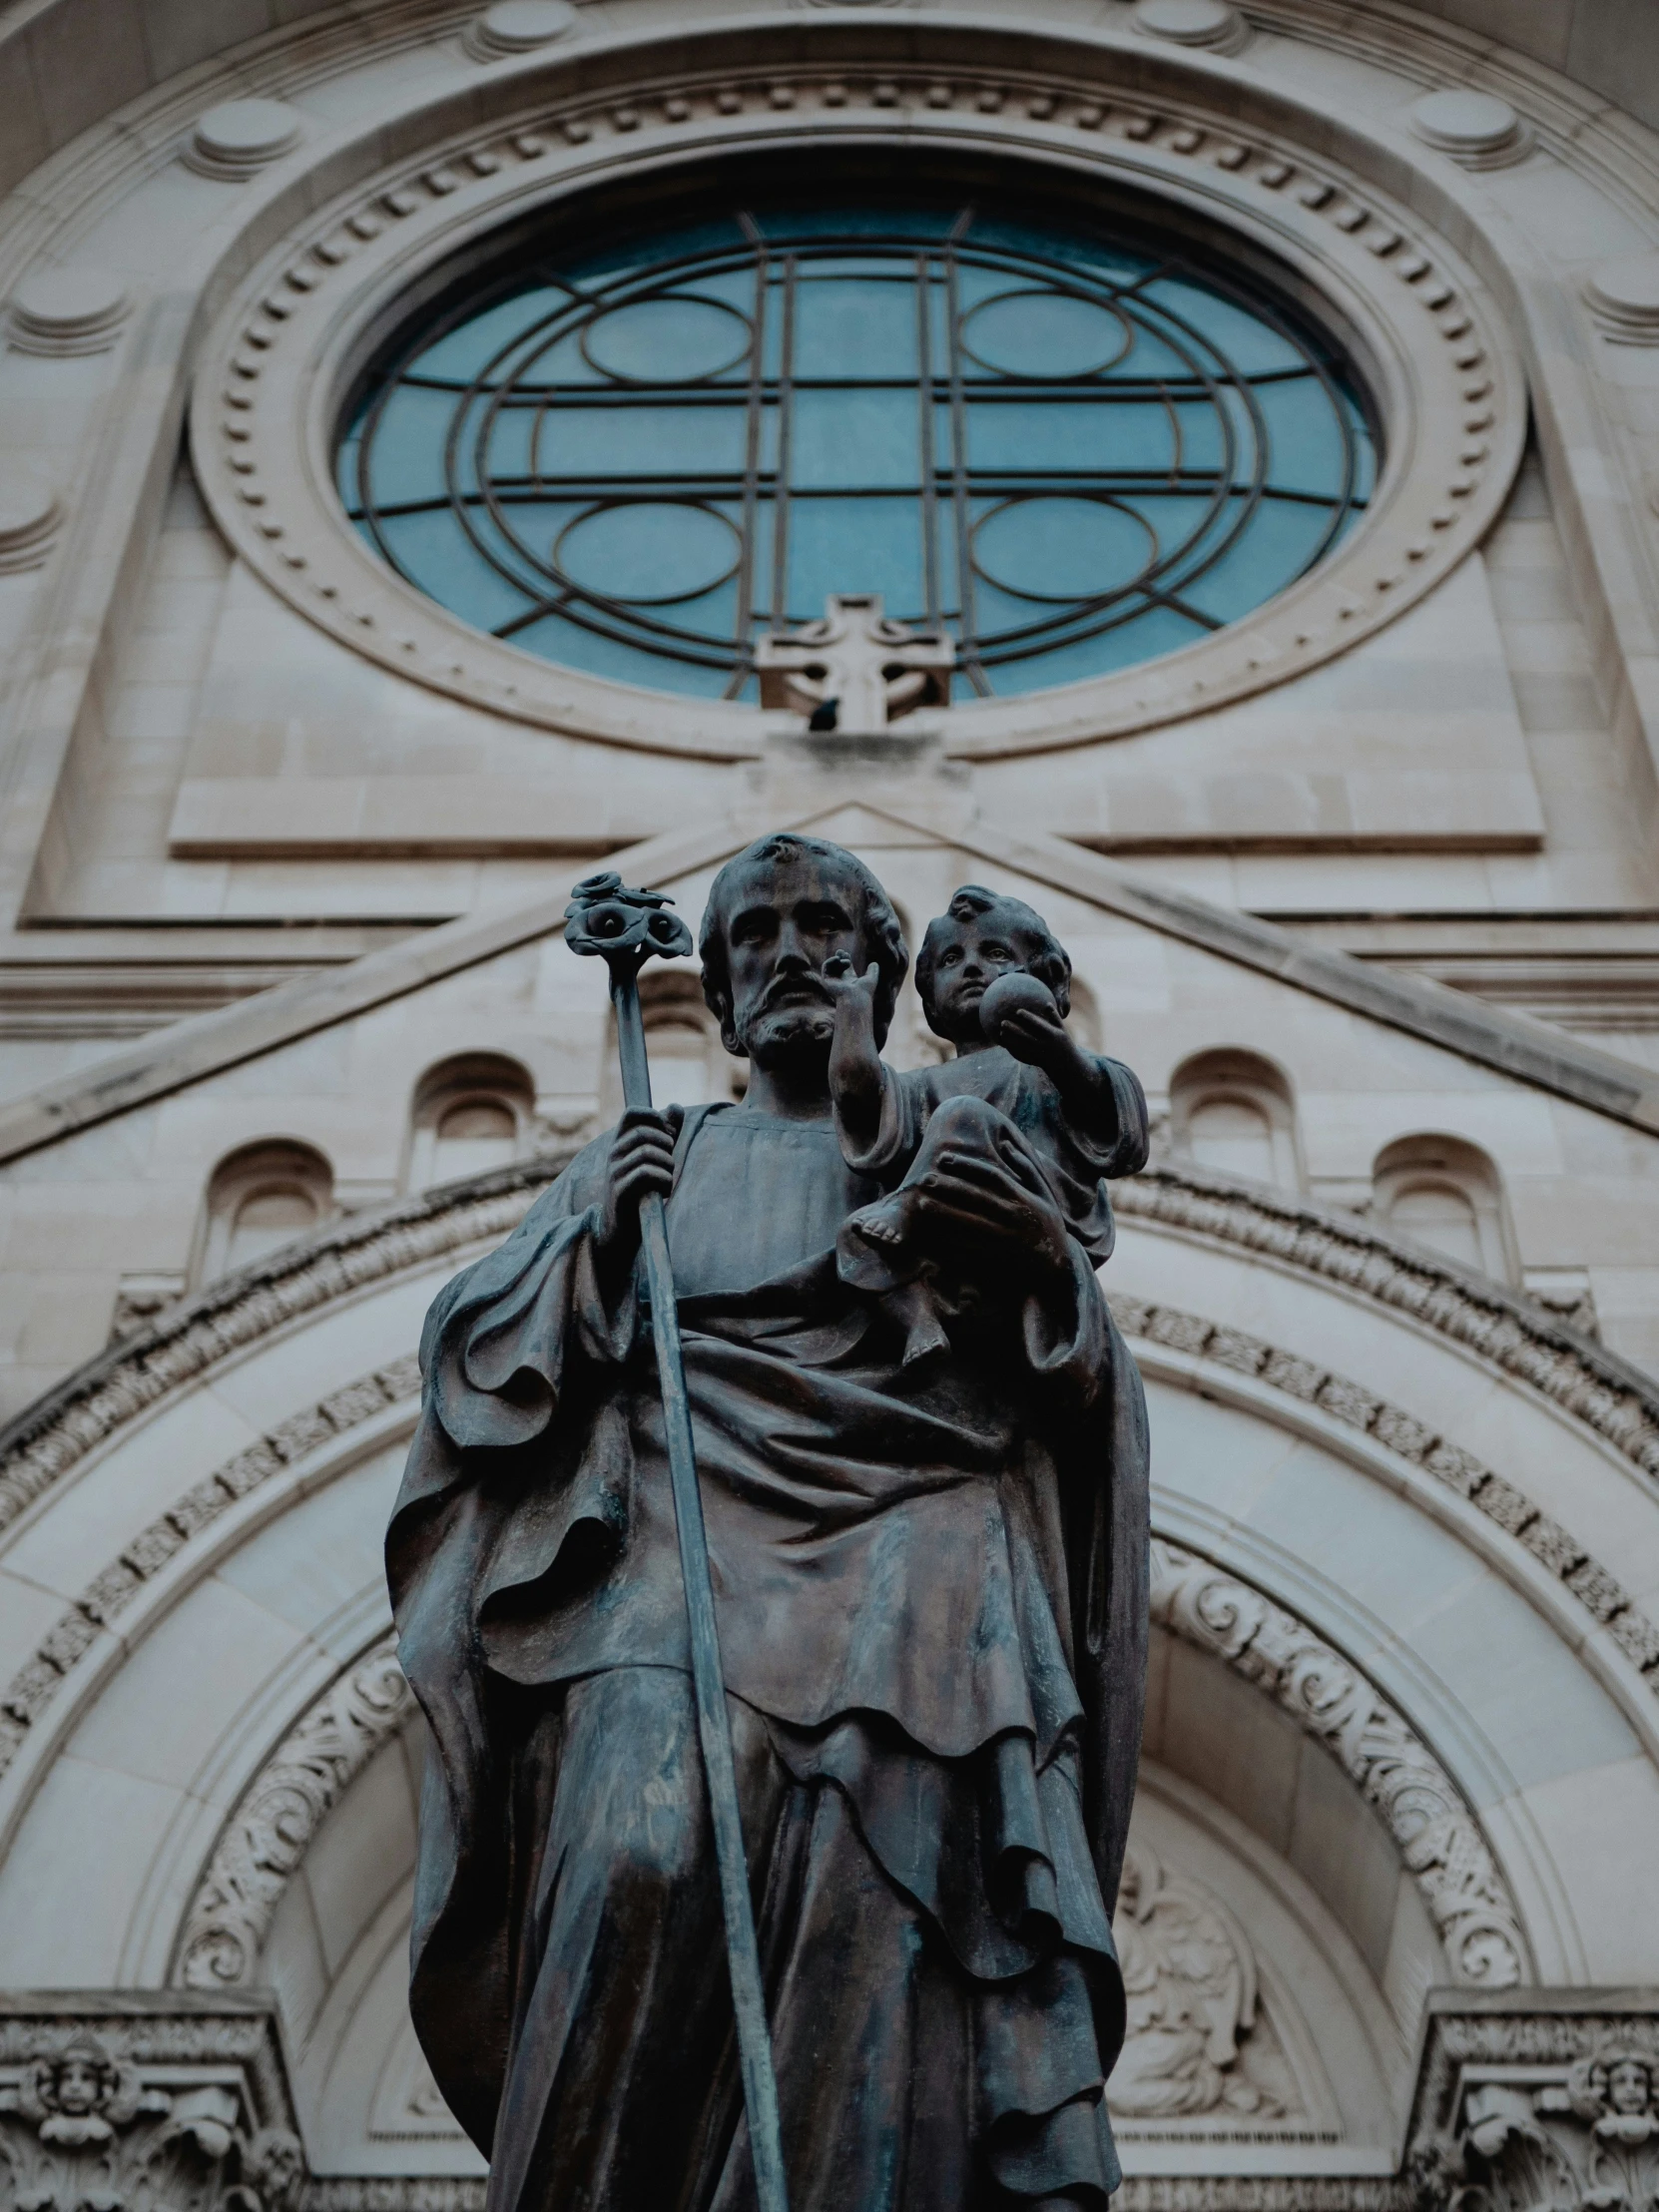 the statue of saint joseph in front of an ornate church